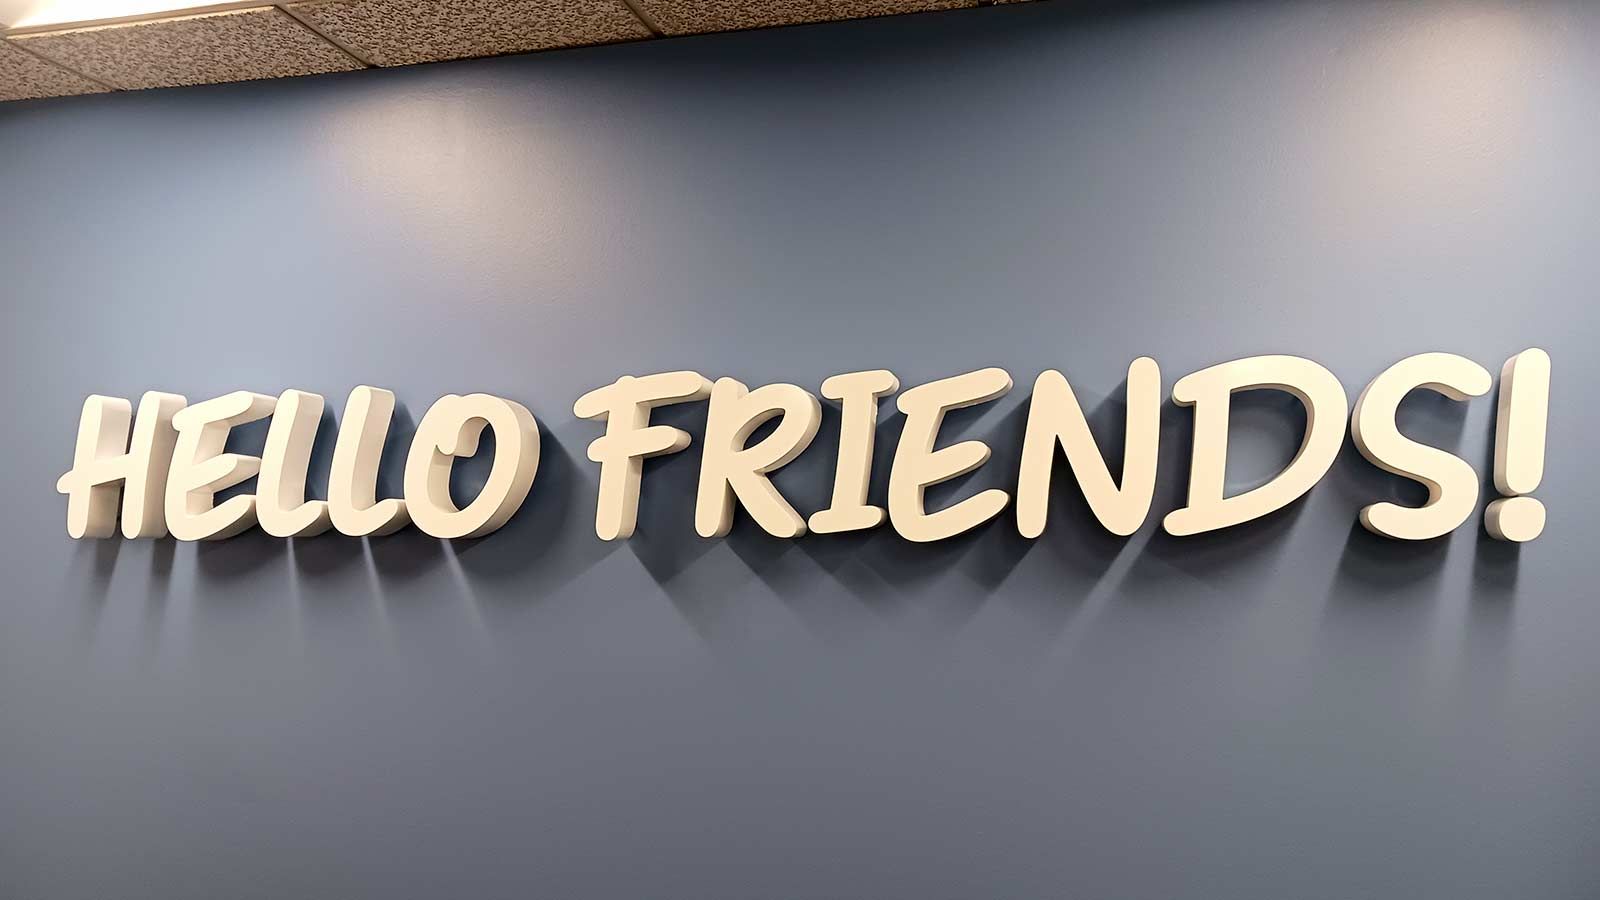 Hello friends bold 3D letters made of aluminum